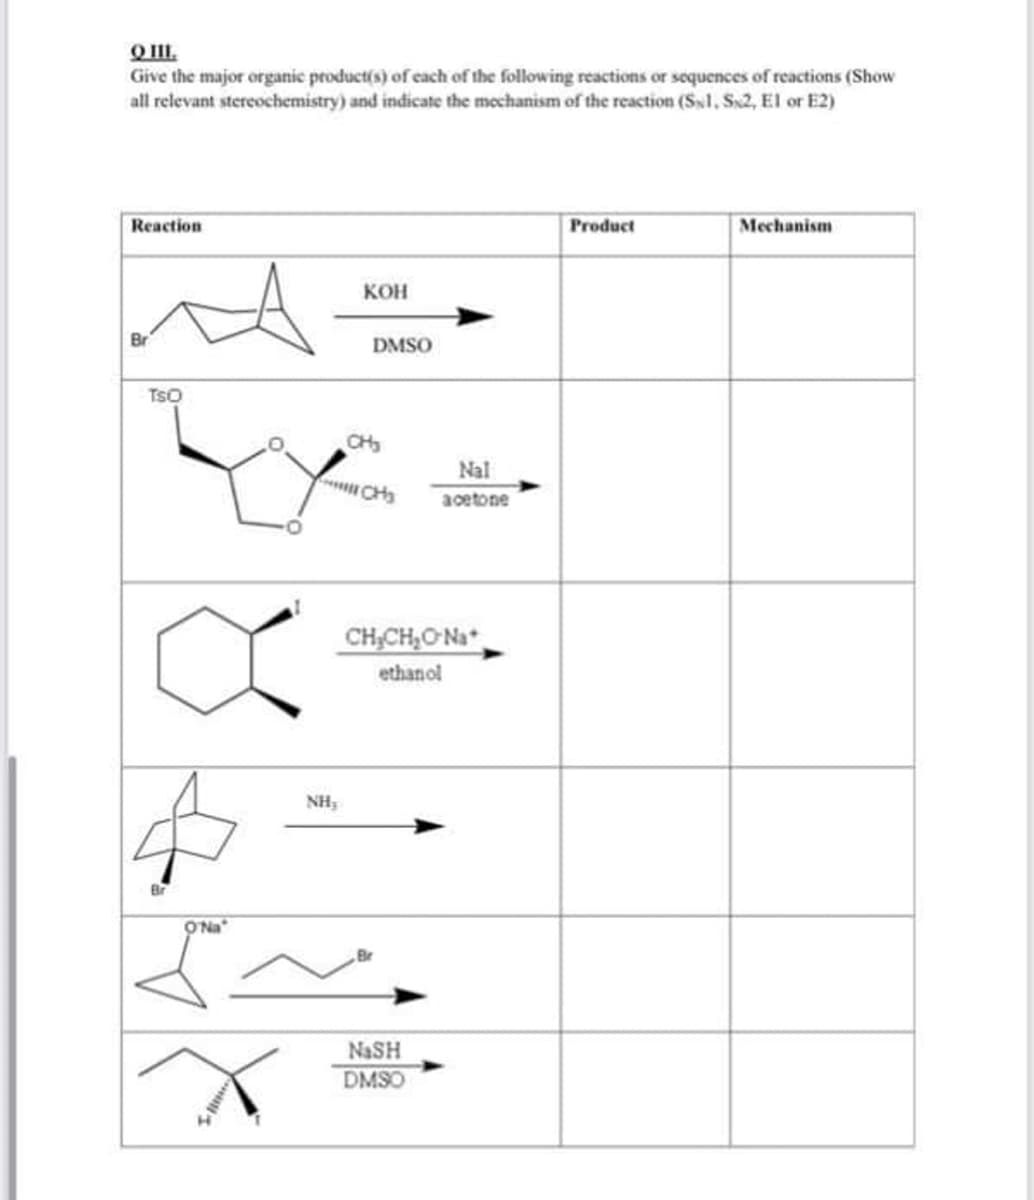 O I.
Give the major organic product(s) of each of the following reactions or scquences of reactions (Show
all relevant stereochemistry) and indicate the mechanism of the reaction (S1, S2, El or E2)
Reaction
Product
Mechanism
Кон
Br
DMSO
TSO
CH
Nal
CHs
acetone
CHCH,ONa
ethanol
NH,
ONa
NaSH
DMSO
